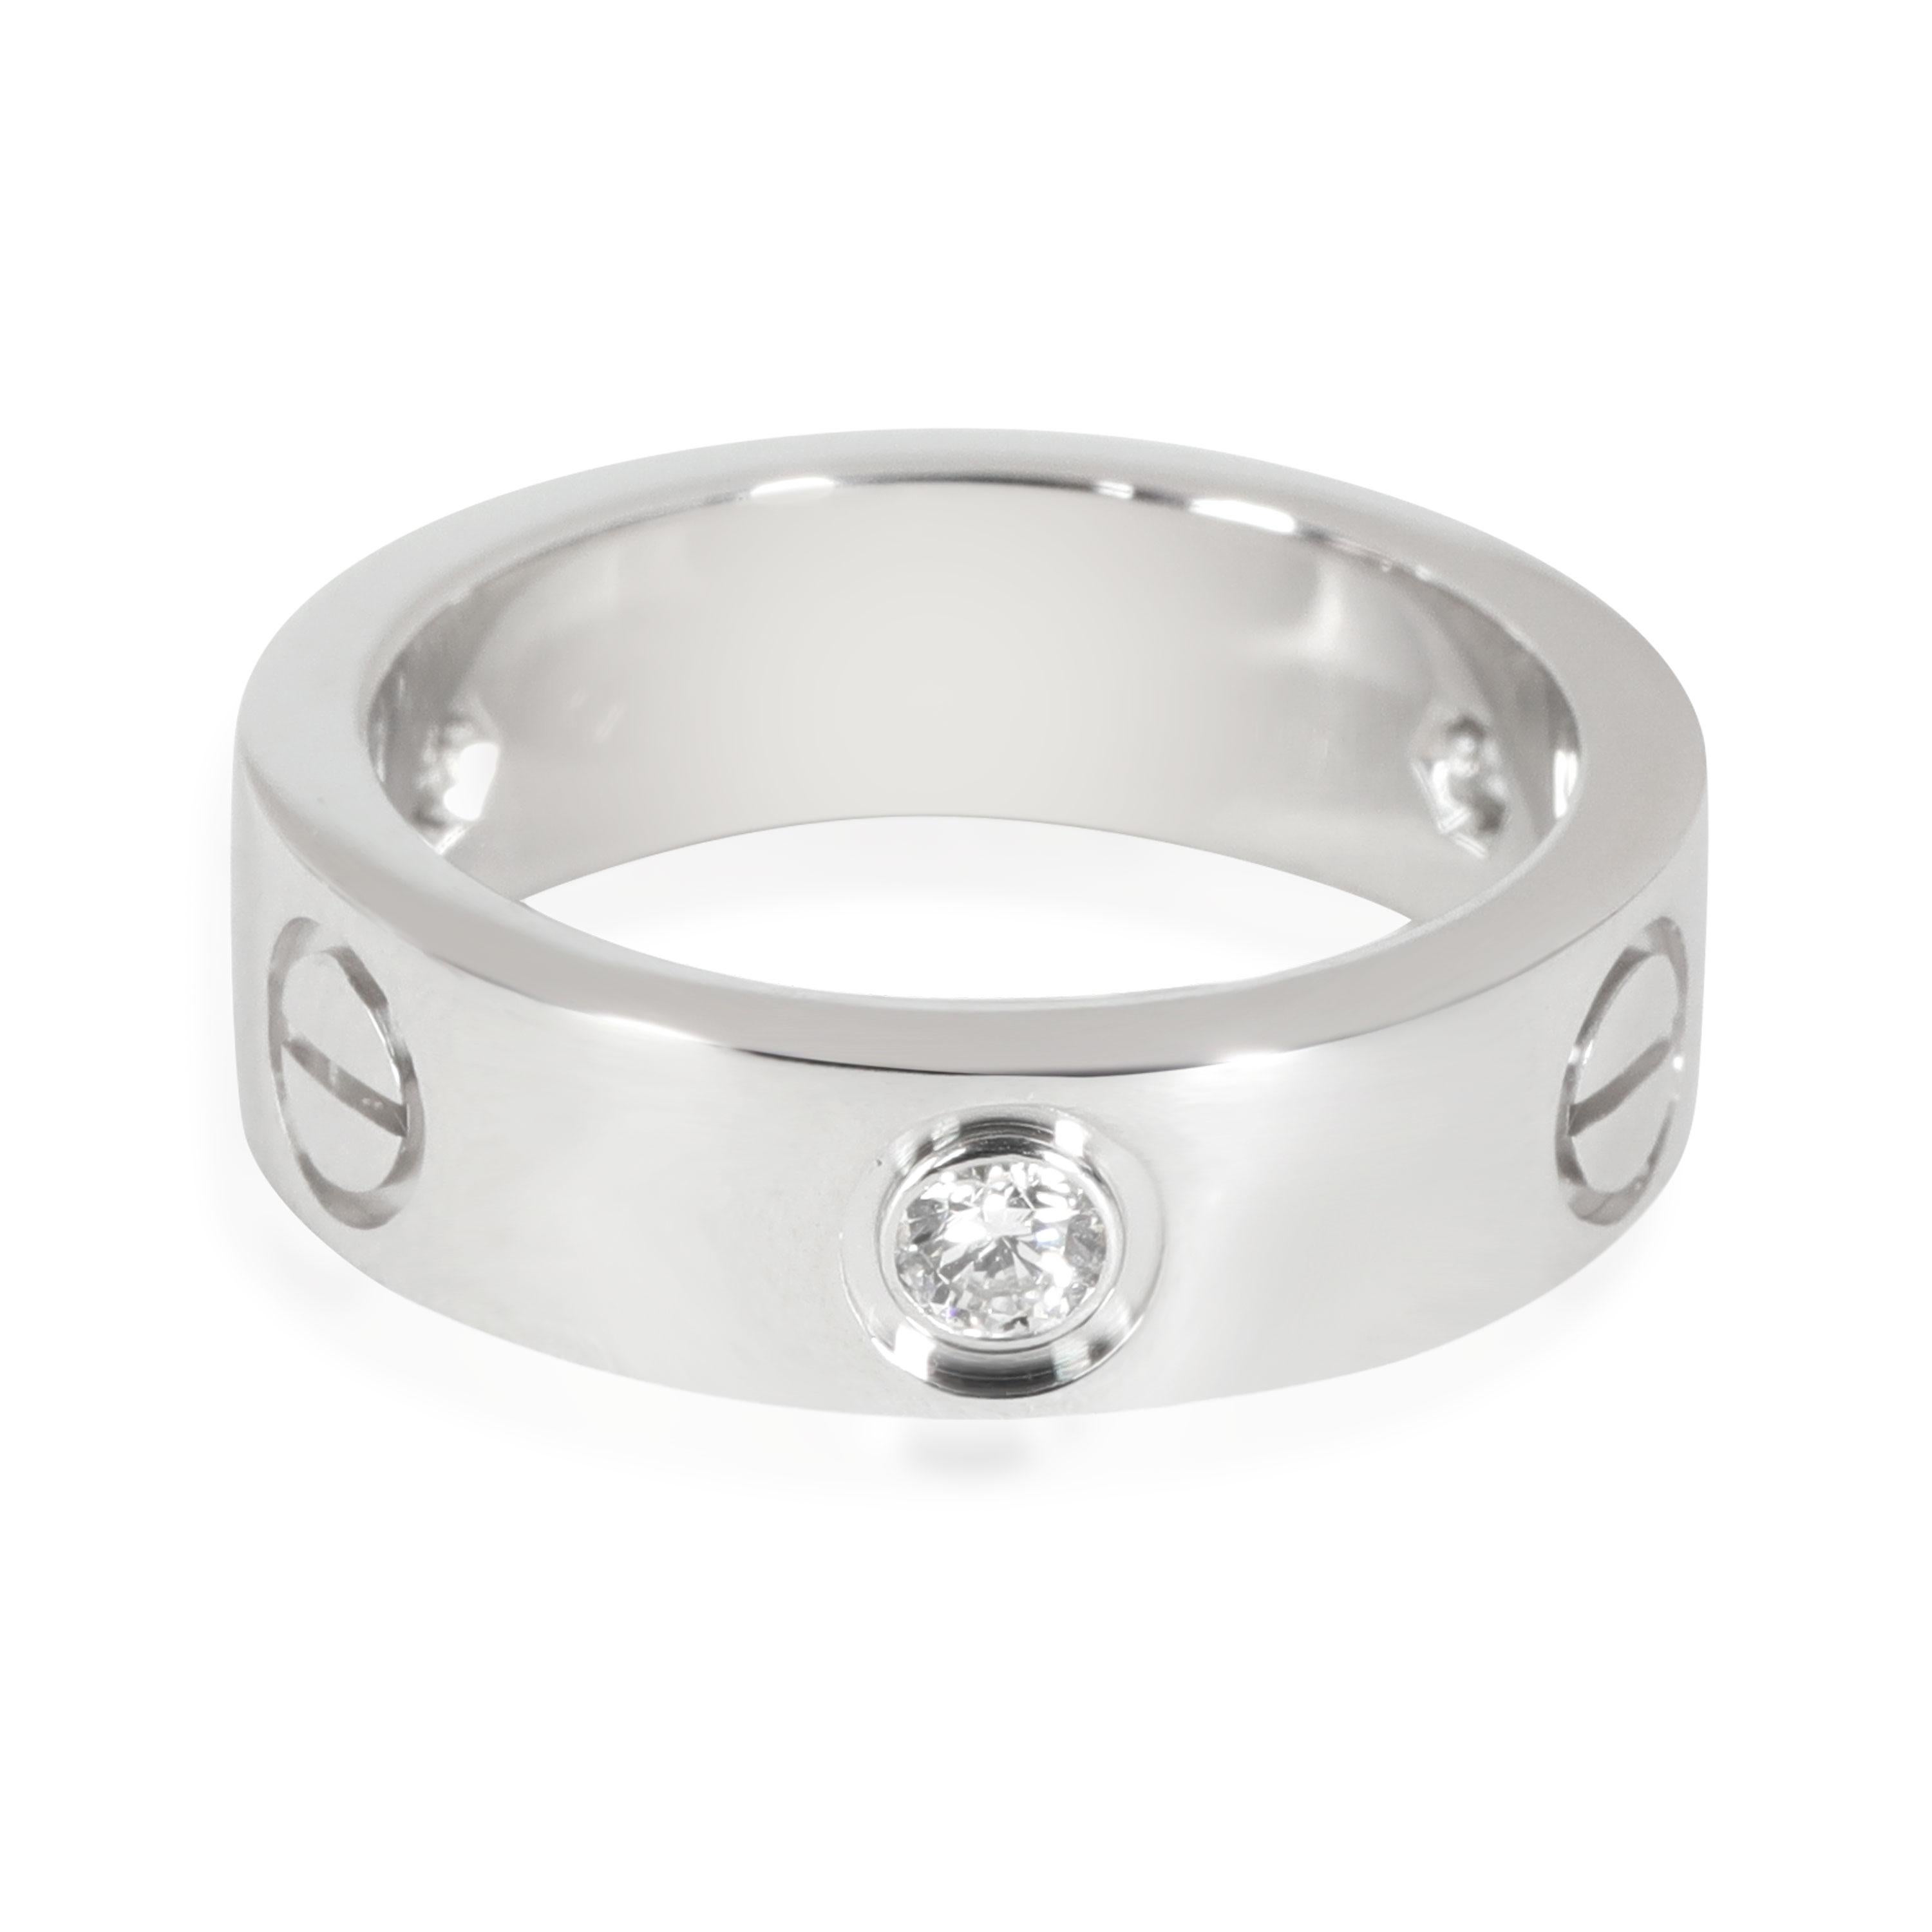 Cartier Love Diamond Ring in 18k White Gold 0.22 CTW

PRIMARY DETAILS
SKU: 115168
Listing Title: Cartier Love Diamond Ring in 18k White Gold 0.22 CTW
Condition Description: Retails for 4100 USD. In excellent condition and recently polished. Ring